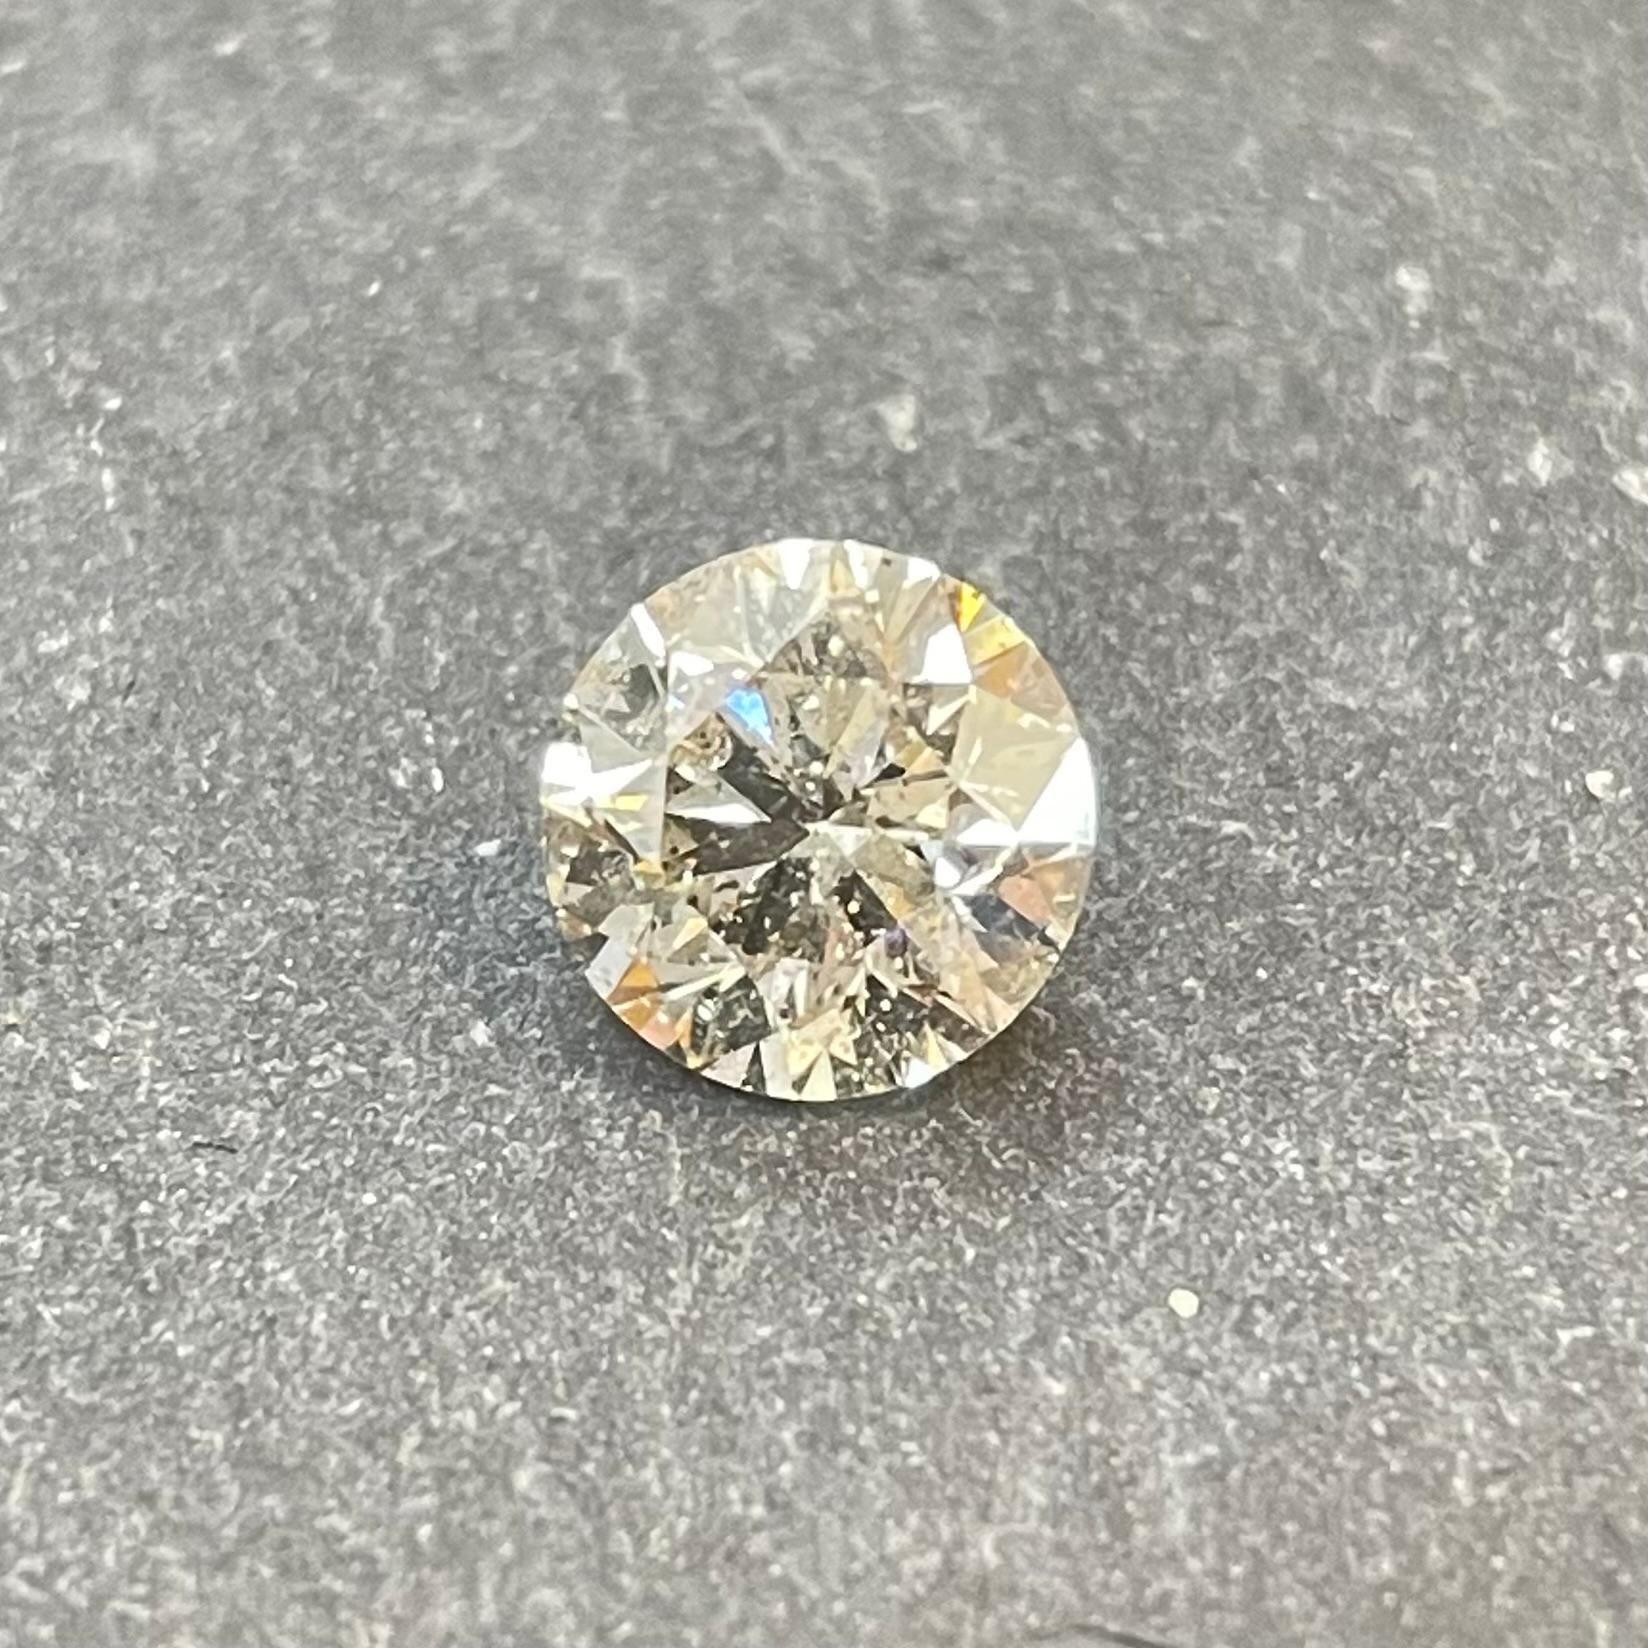 ITEM DESCRIPTION

ID #:NYC57484
Stone Shape:Round Brilliance
Diamond Weight:1.32 carat
Clarity:SI3
Color:K
Cut: Round 
Measurements: 6.86 x 6.86 x 4.38 mm
Appraisal Value:$2965.00
Our Price: $1975.00

These genuine diamonds are graded approximate by